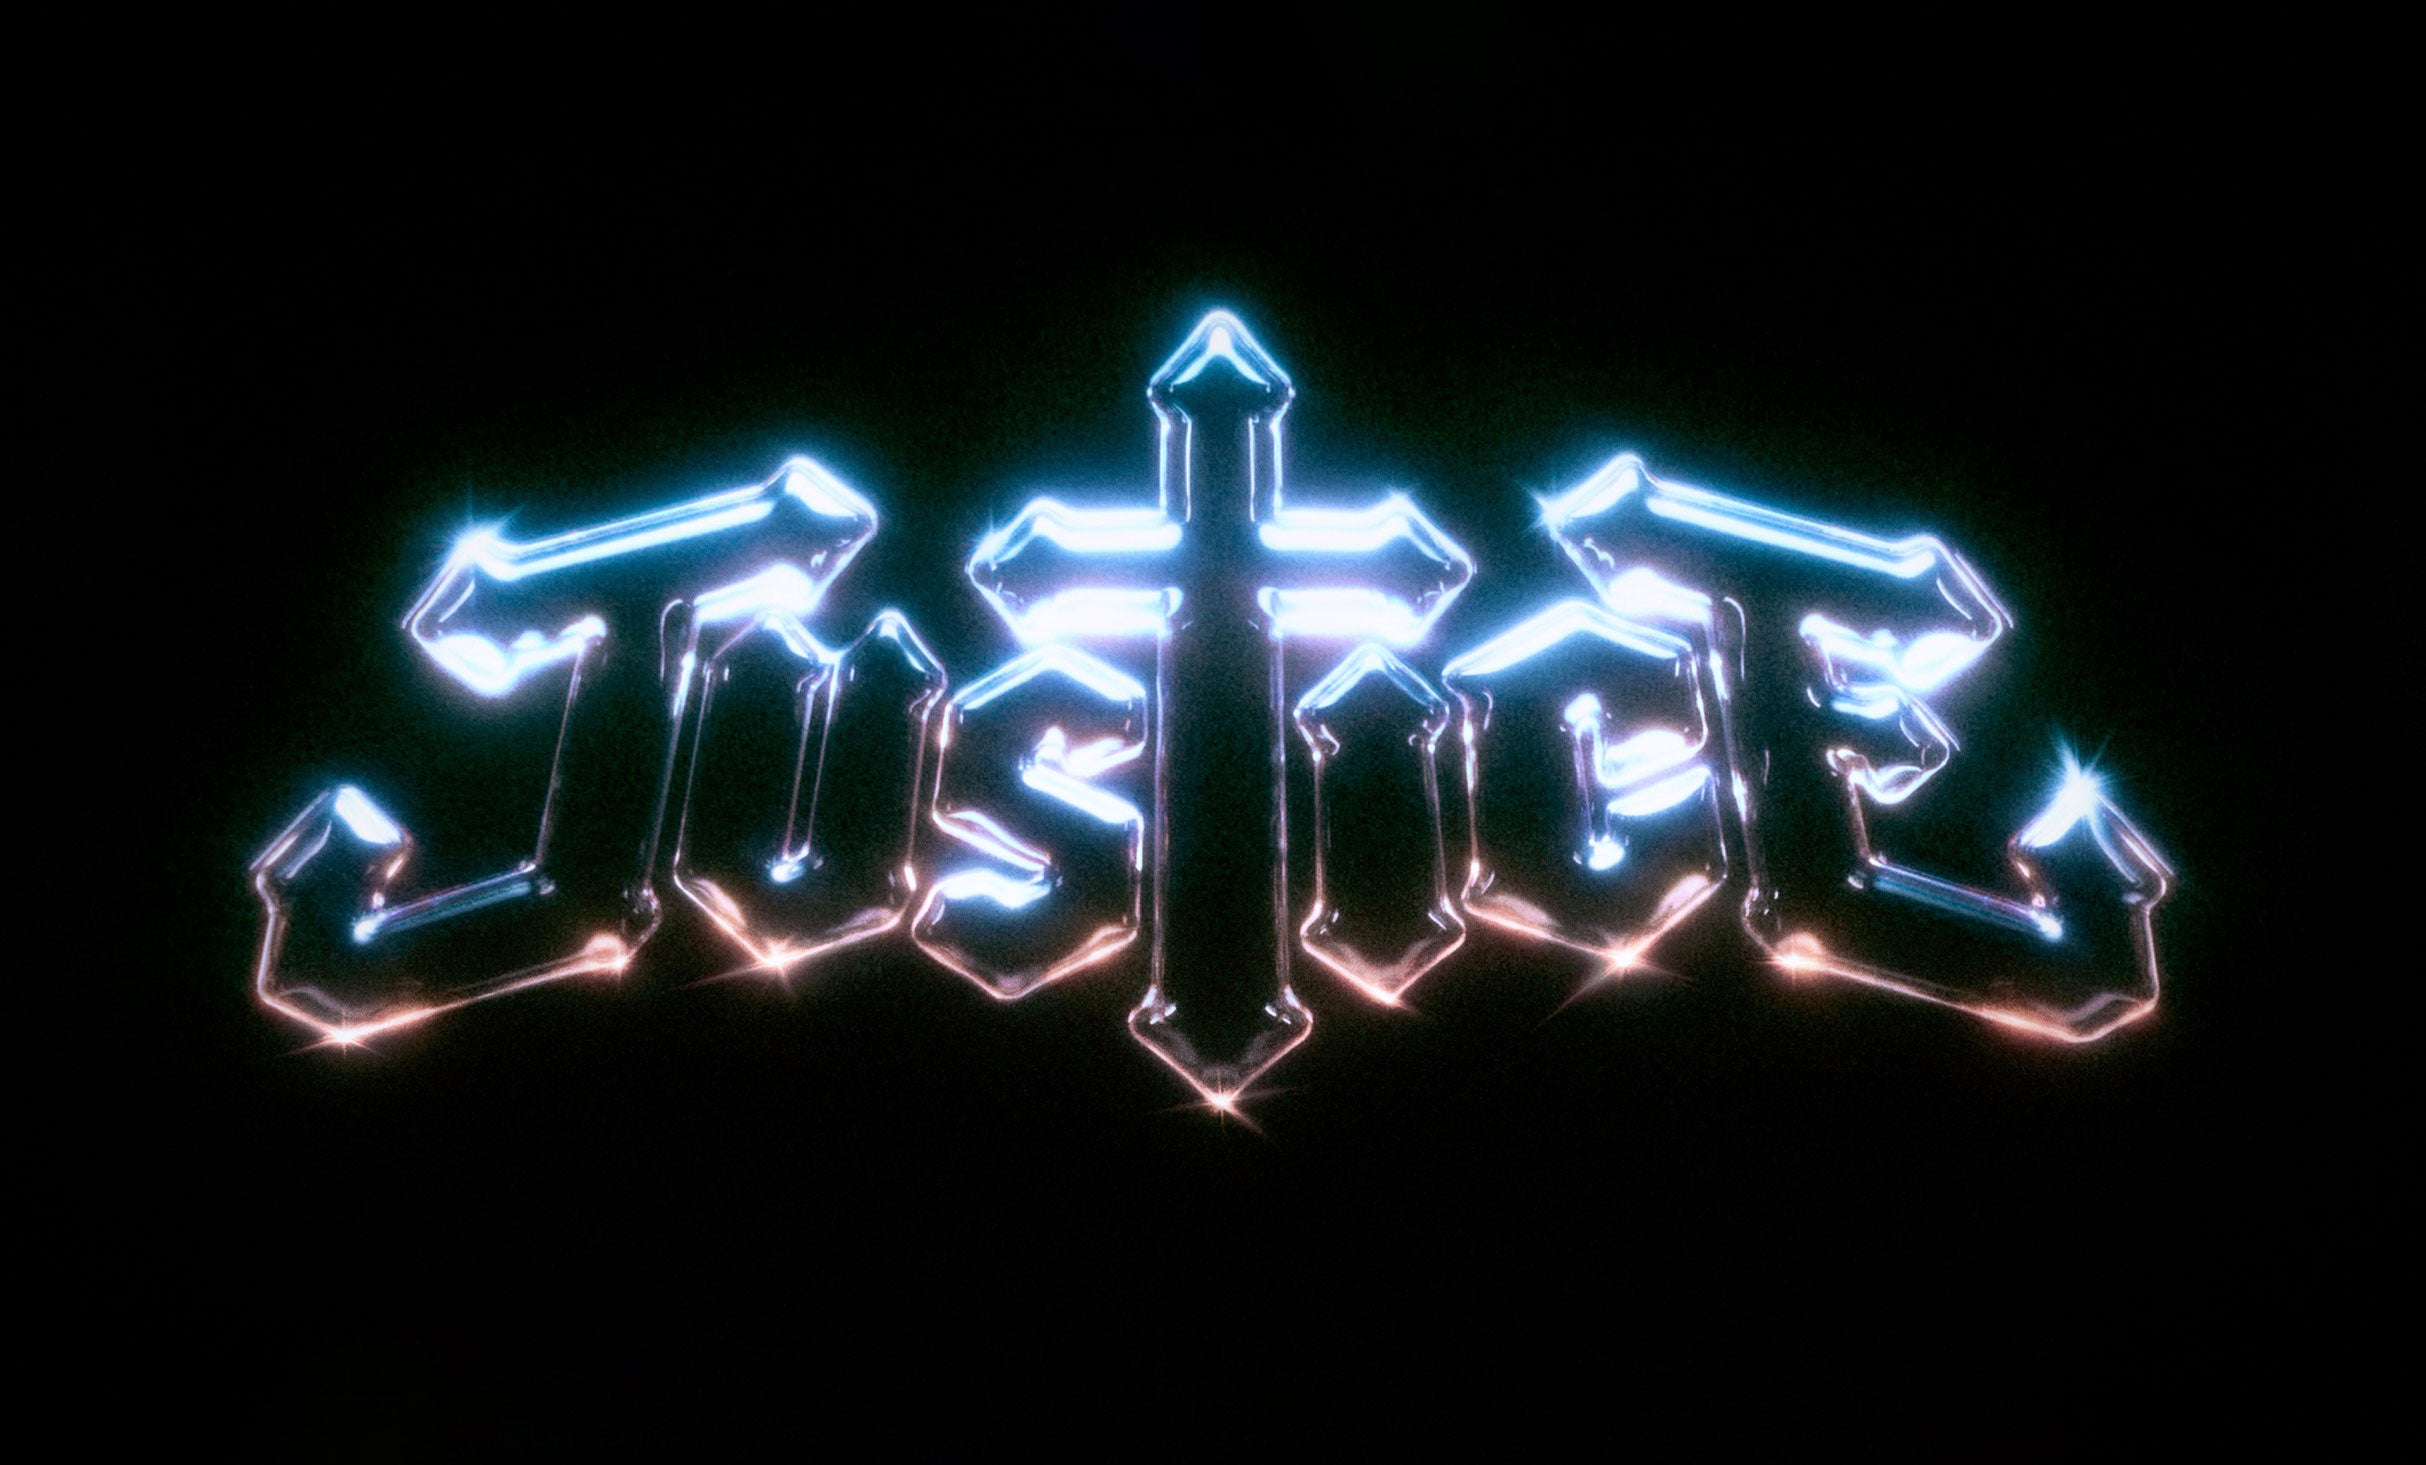 Justice: Live free presale password for early tickets in Boston